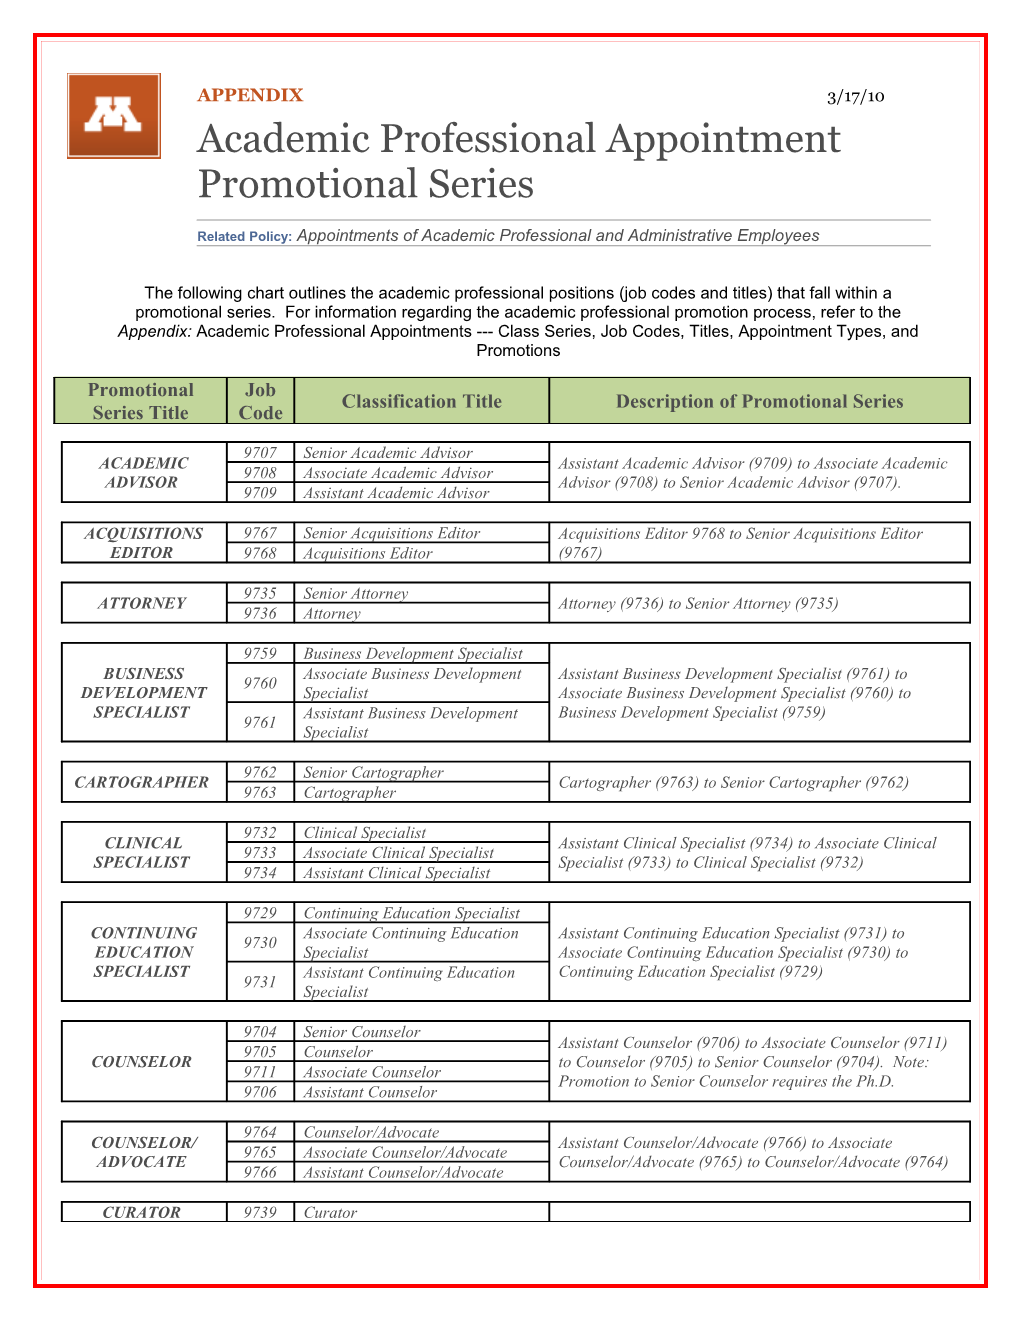 Academic Professional Appointment Promotional Series